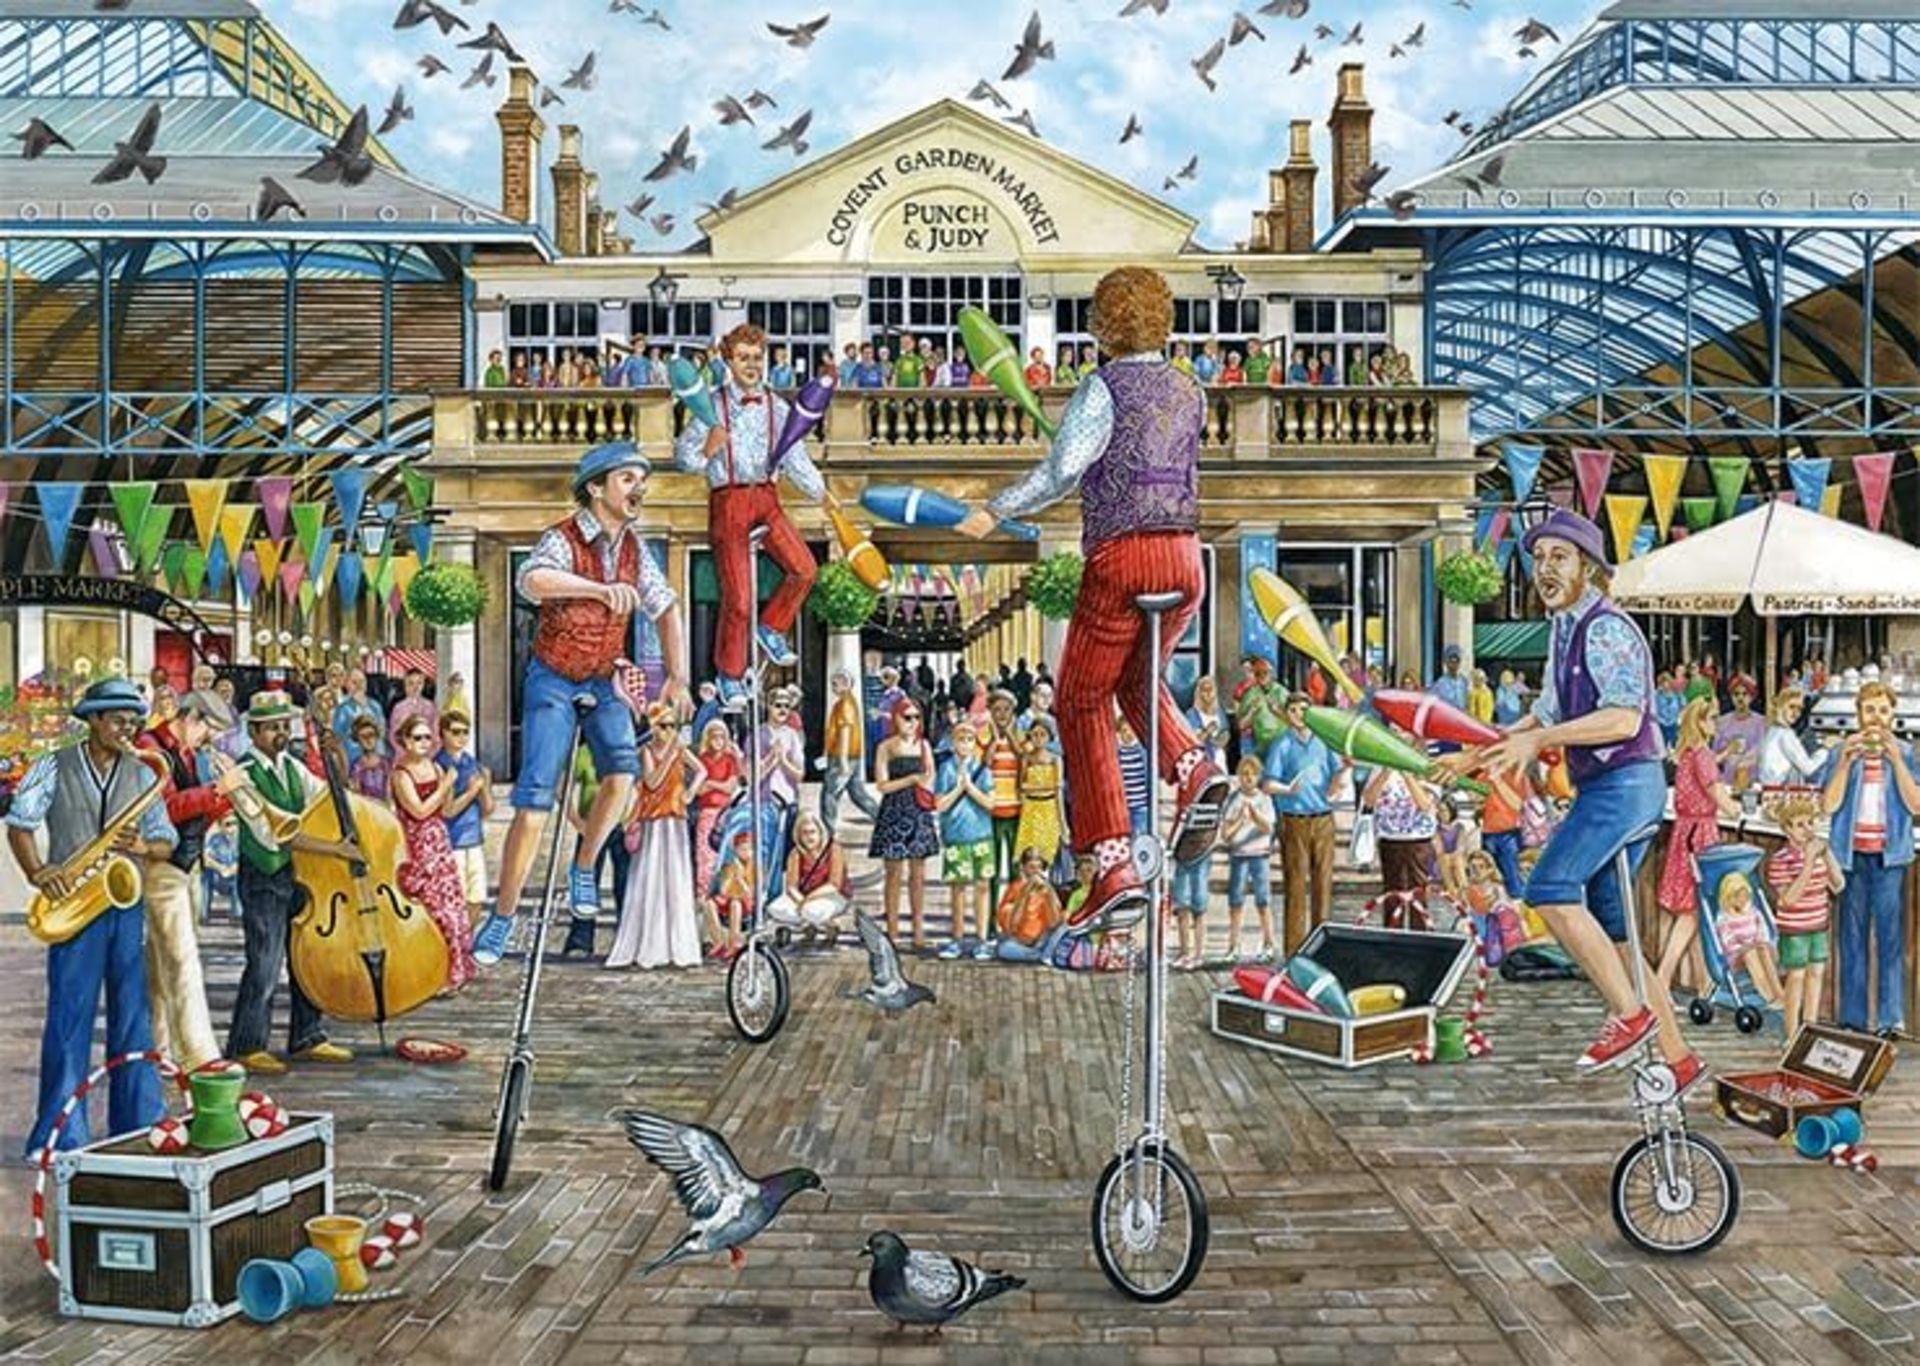 50 X NEW COVENT GARDEN 500PC JIGSAW - Image 4 of 5